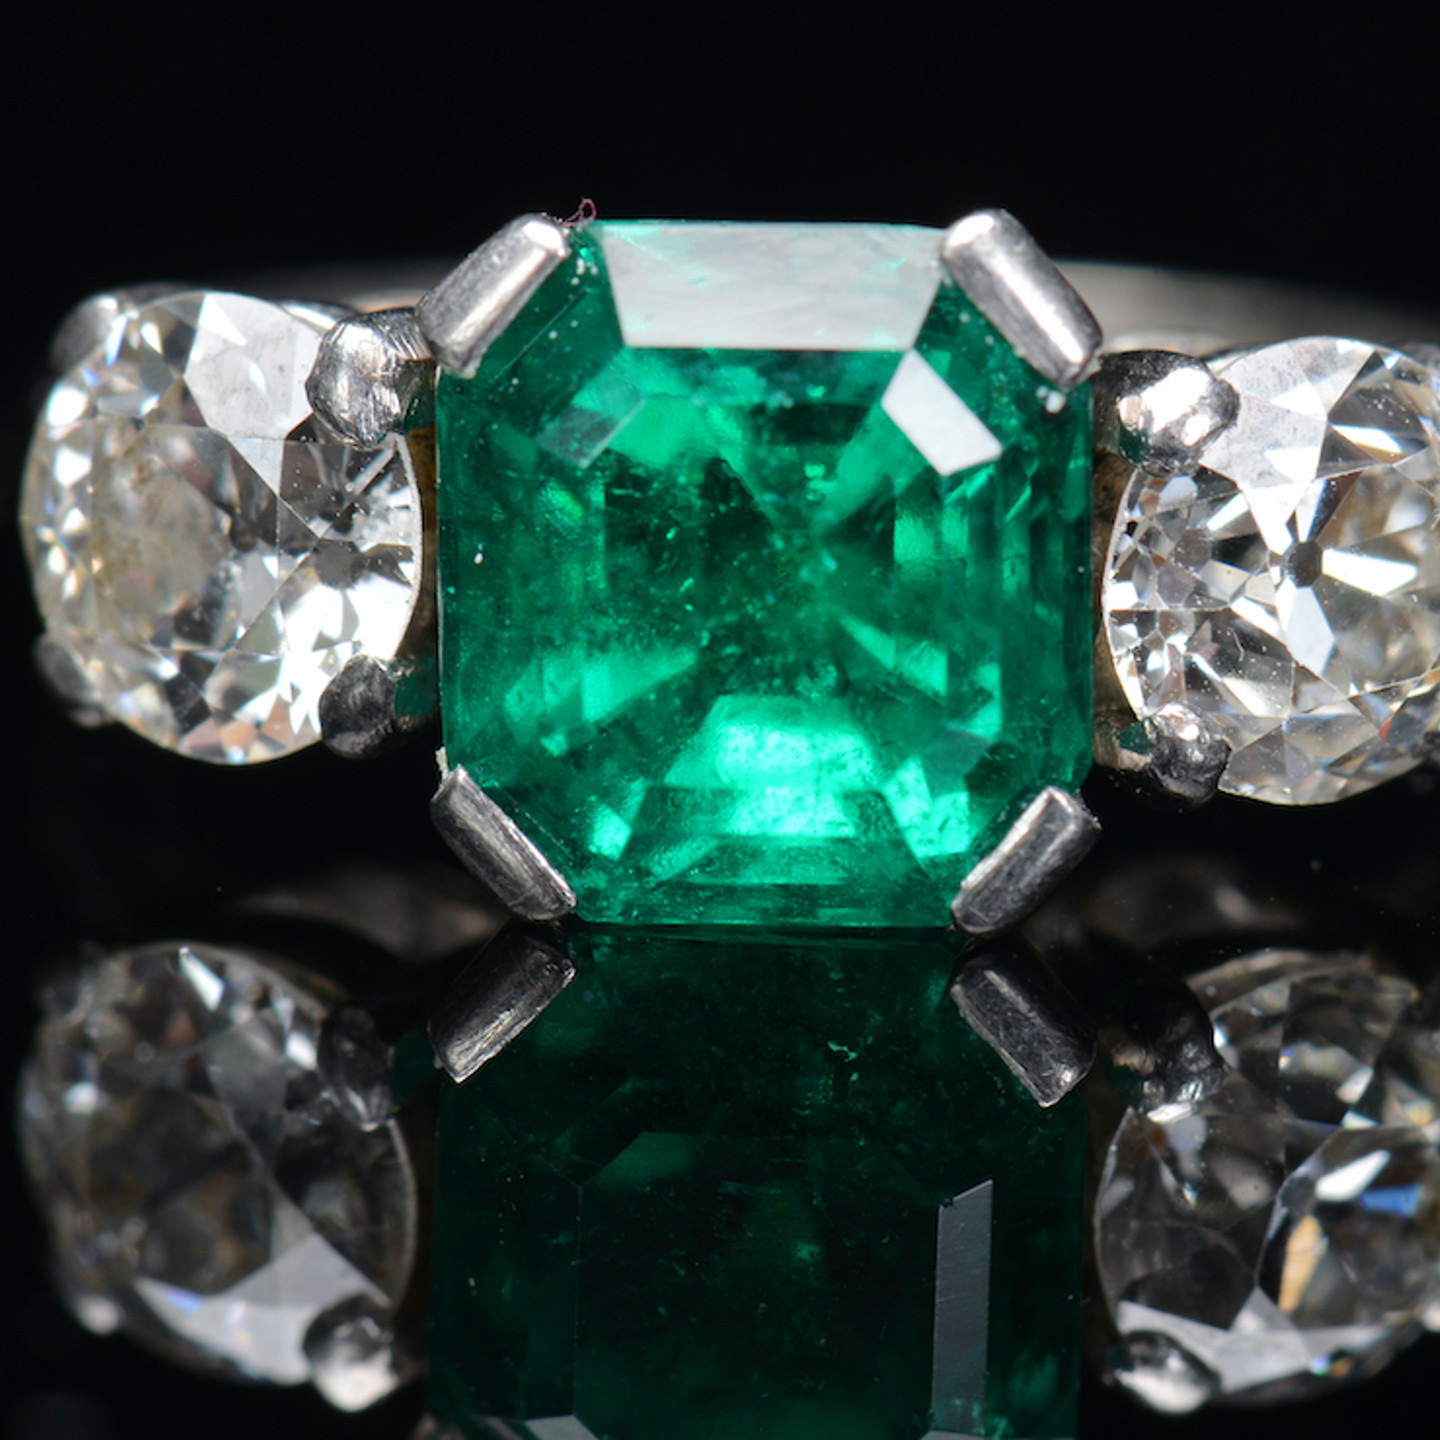 An 18Ct White Gold Ring Set With An Emerald And Diamonds. Sold For £5000